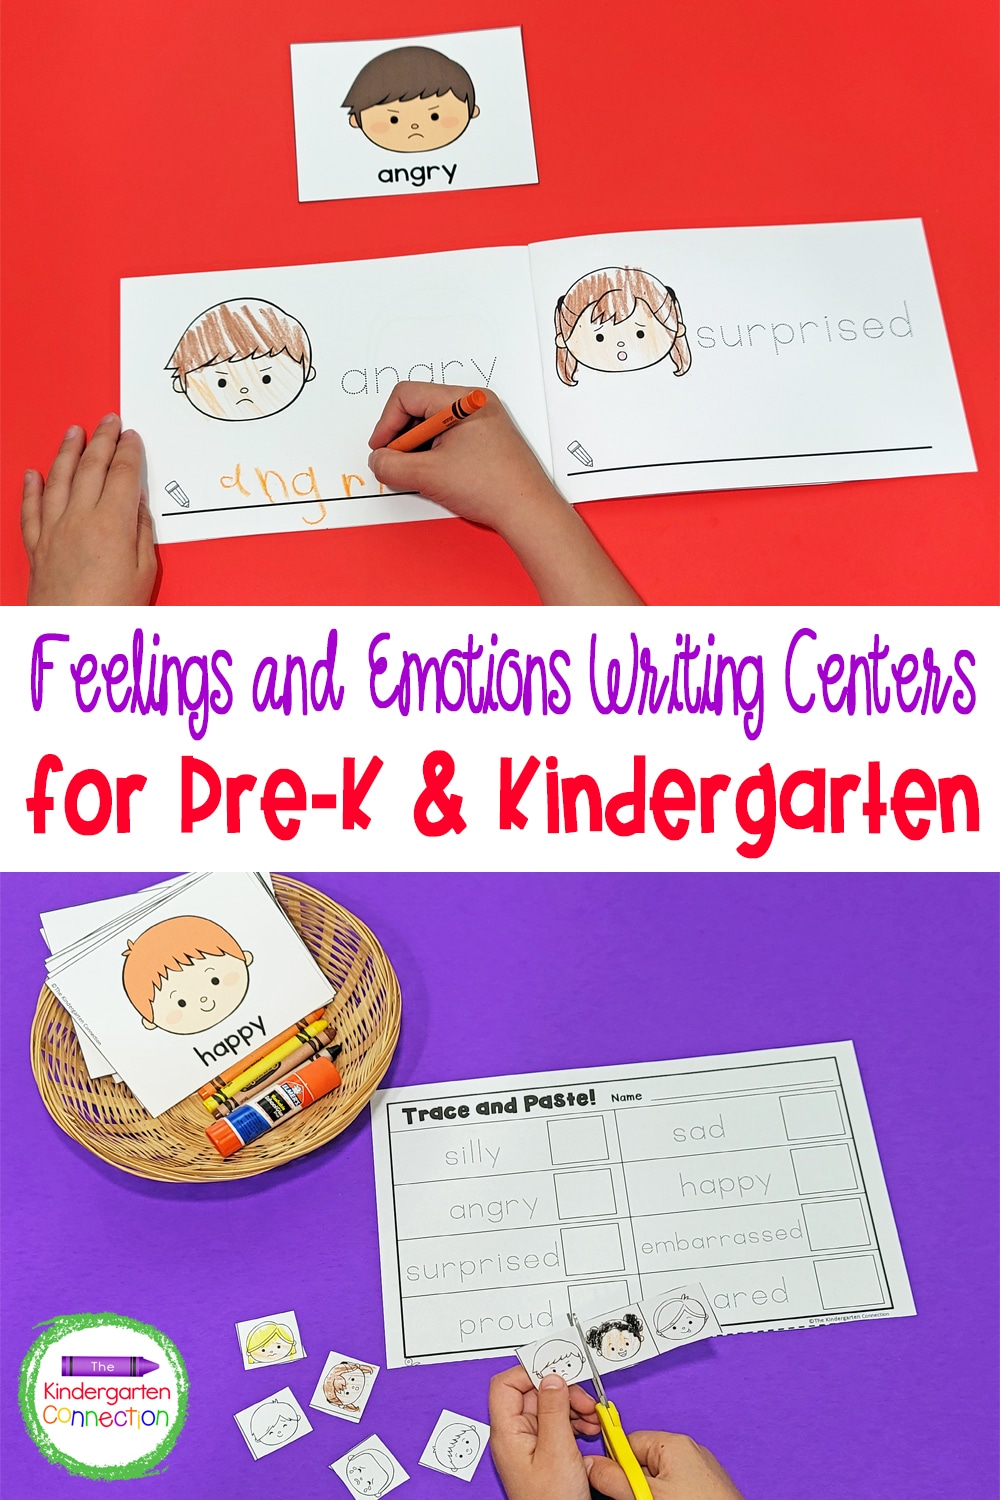 These Pre-K & Kindergarten Feelings and Emotions Writing Activities are great for working on social-emotional learning and writing skills!